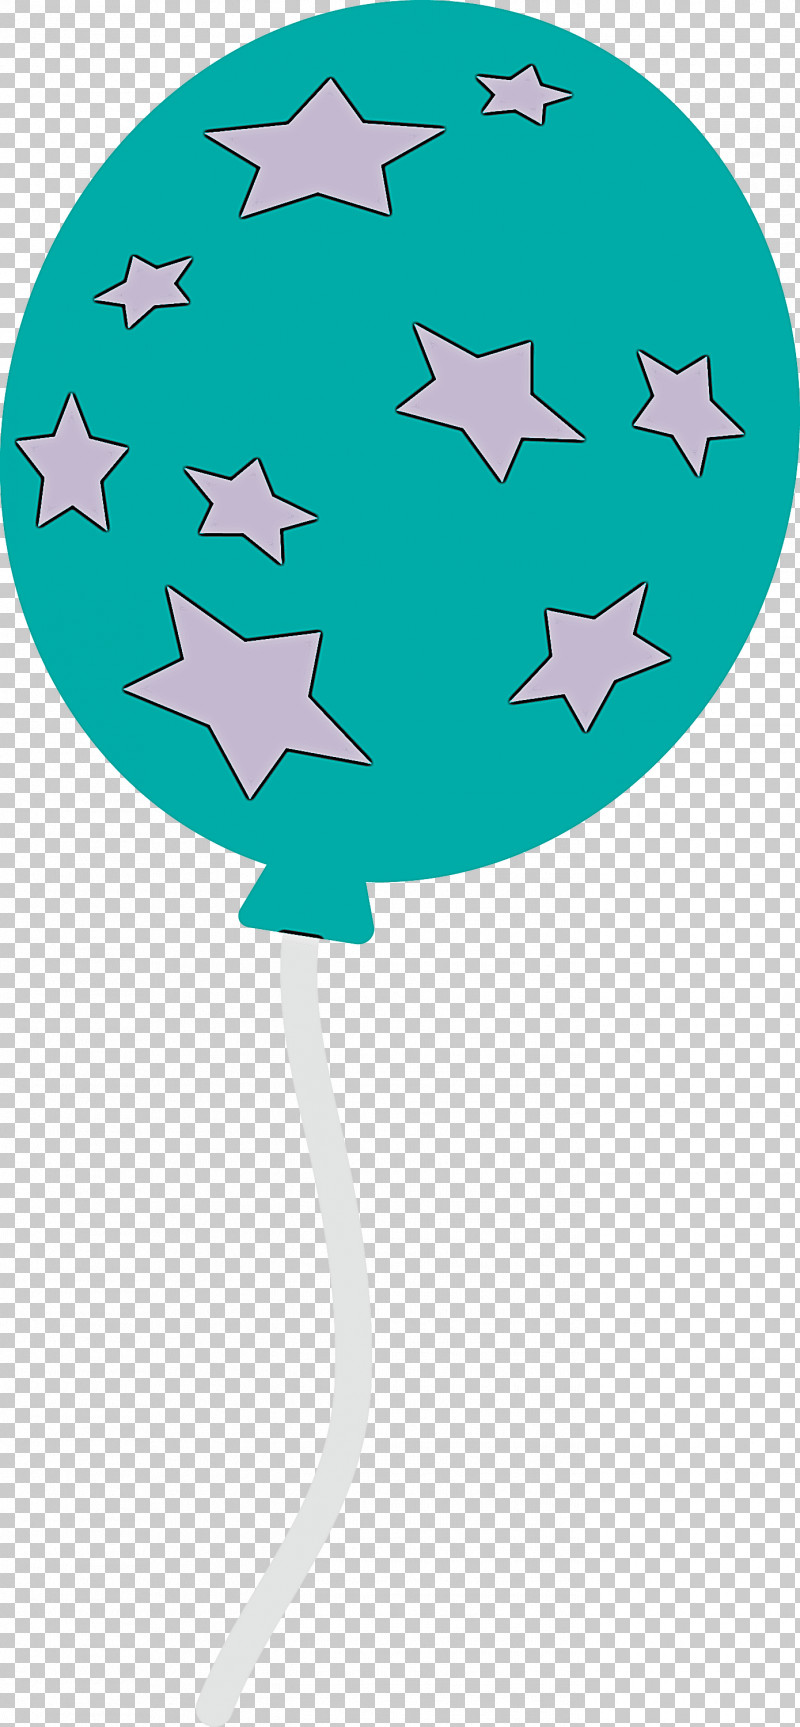 Balloon PNG, Clipart, Balloon, Star, Turquoise Free PNG Download